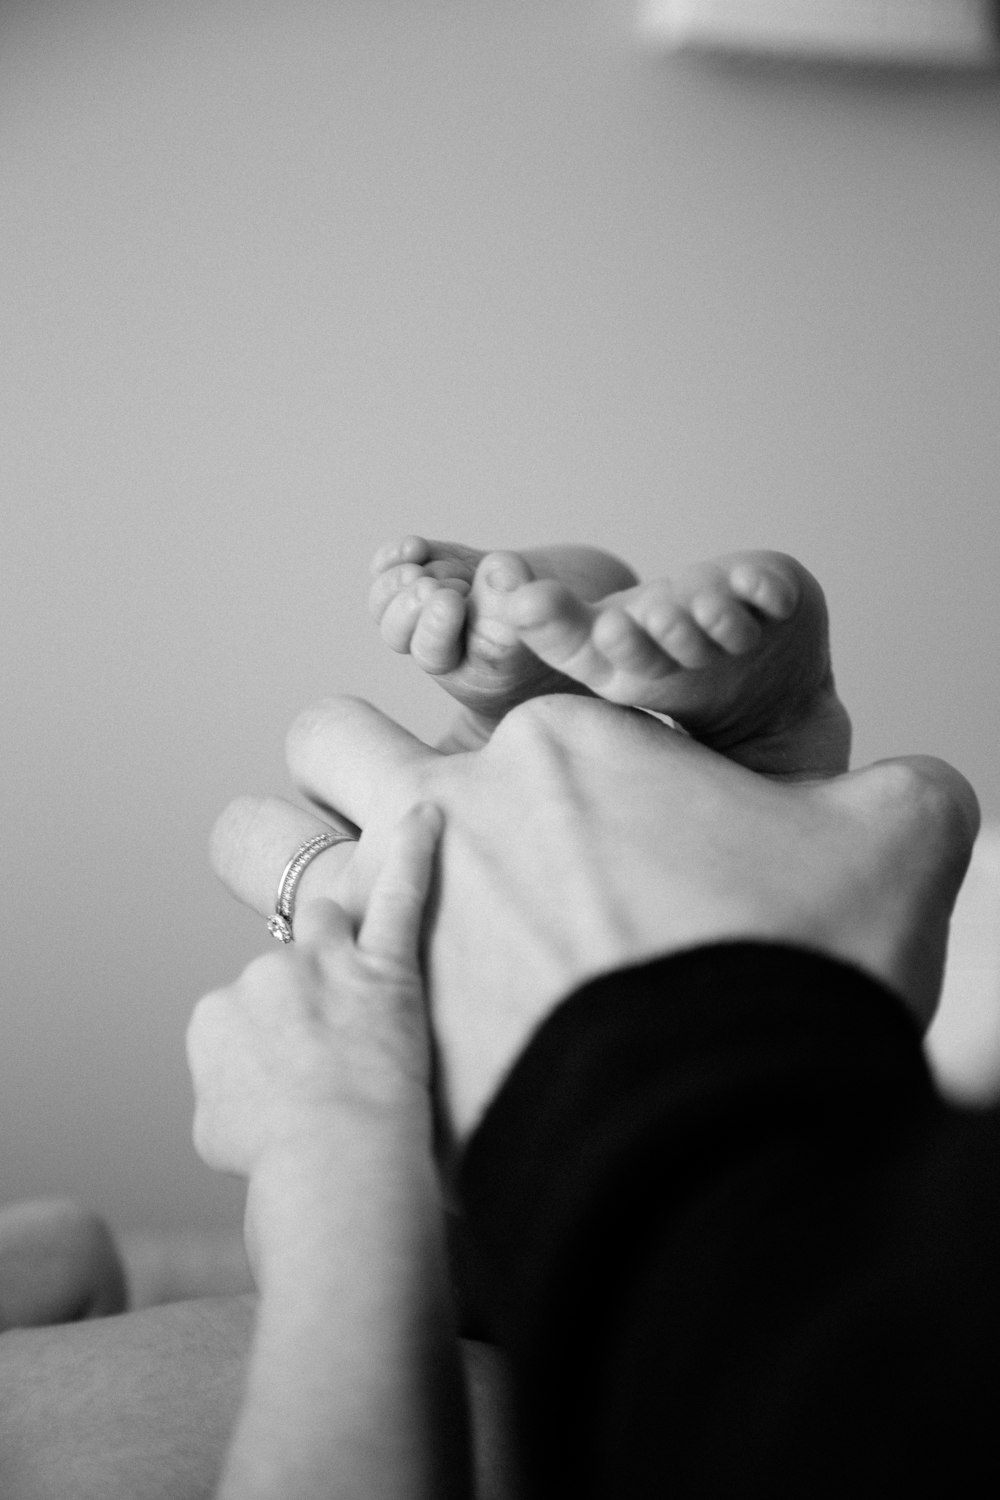 grayscale photography of baby's and person's hands